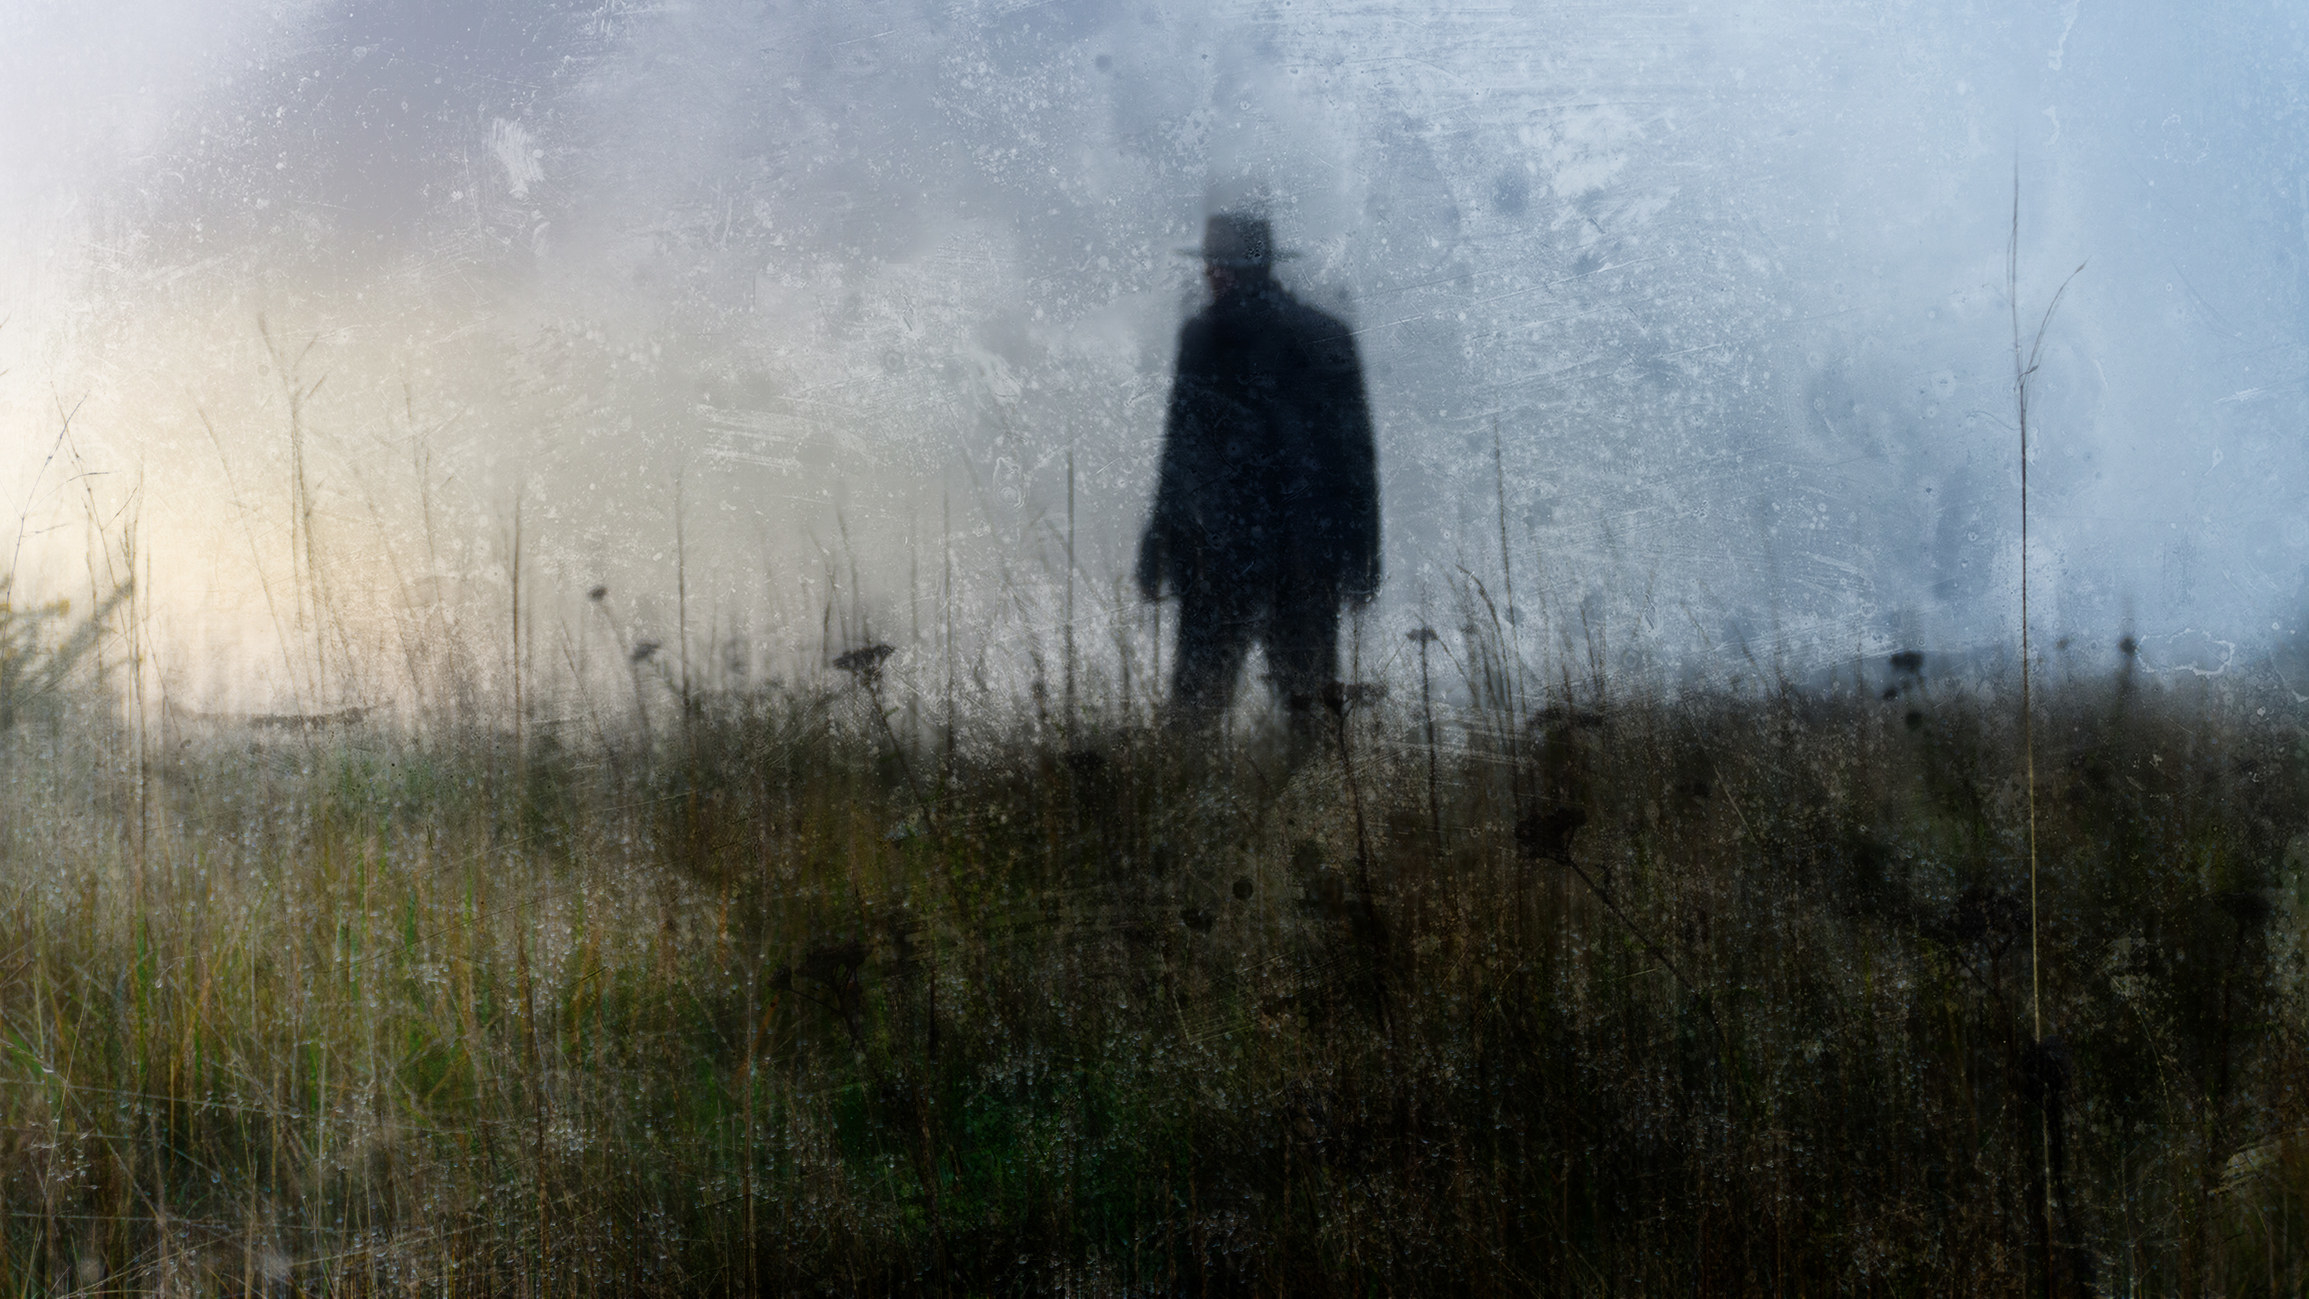 Silhouette of a man with a wide-brimmed hat walking in the tall grass